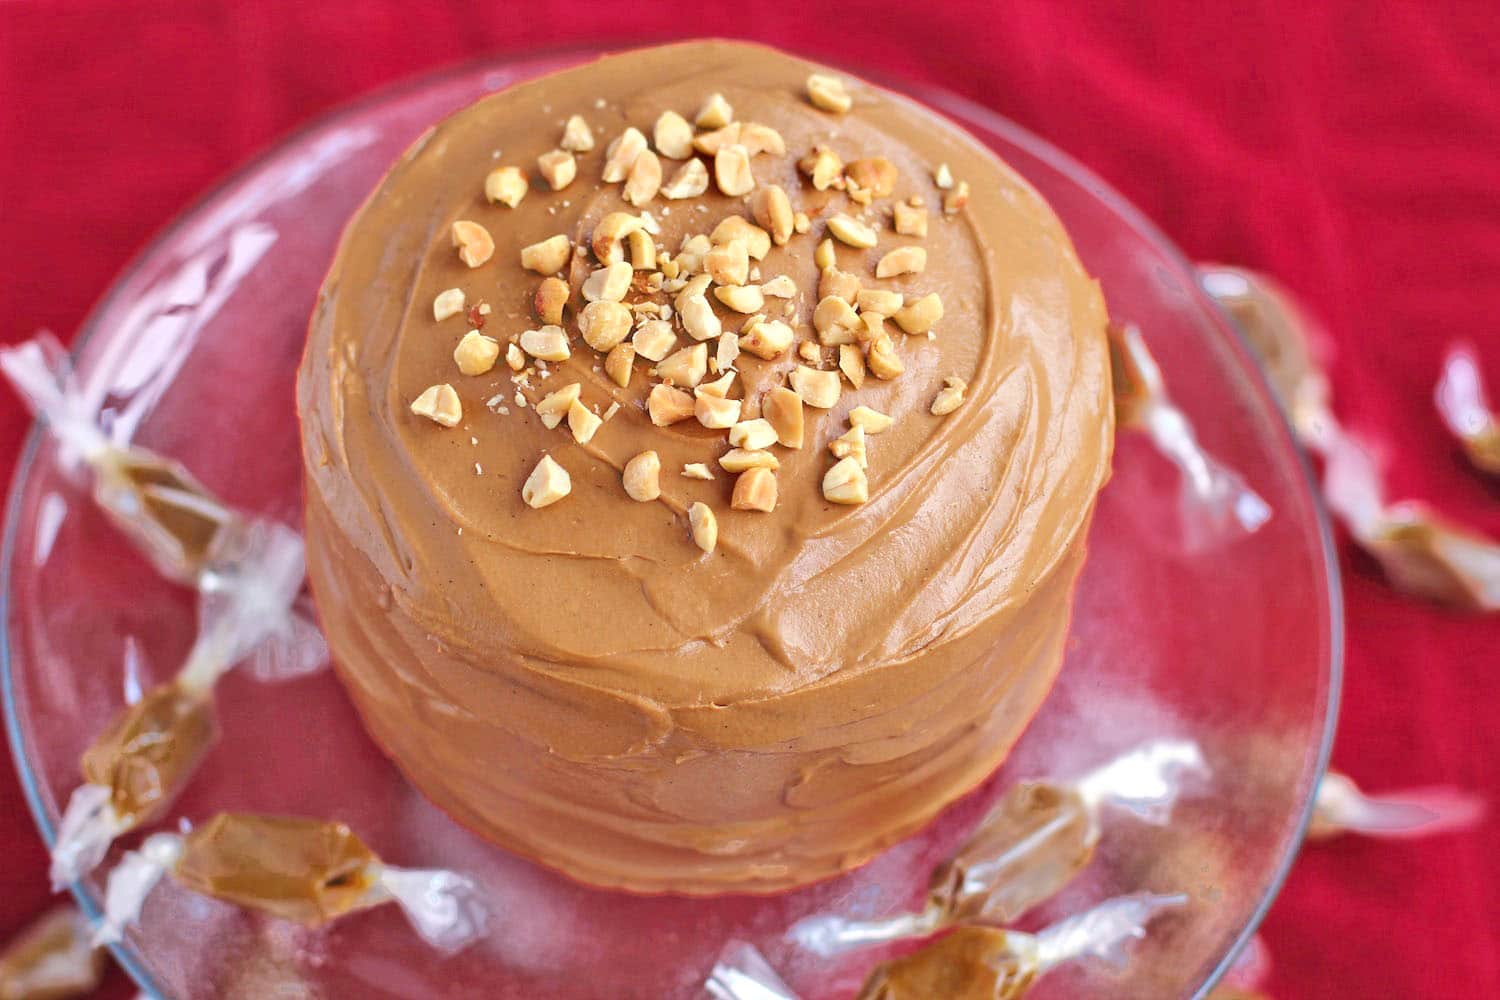 HEALTHY PEANUT BUTTER BANANA CAKE WITH CARAMEL FROSTING